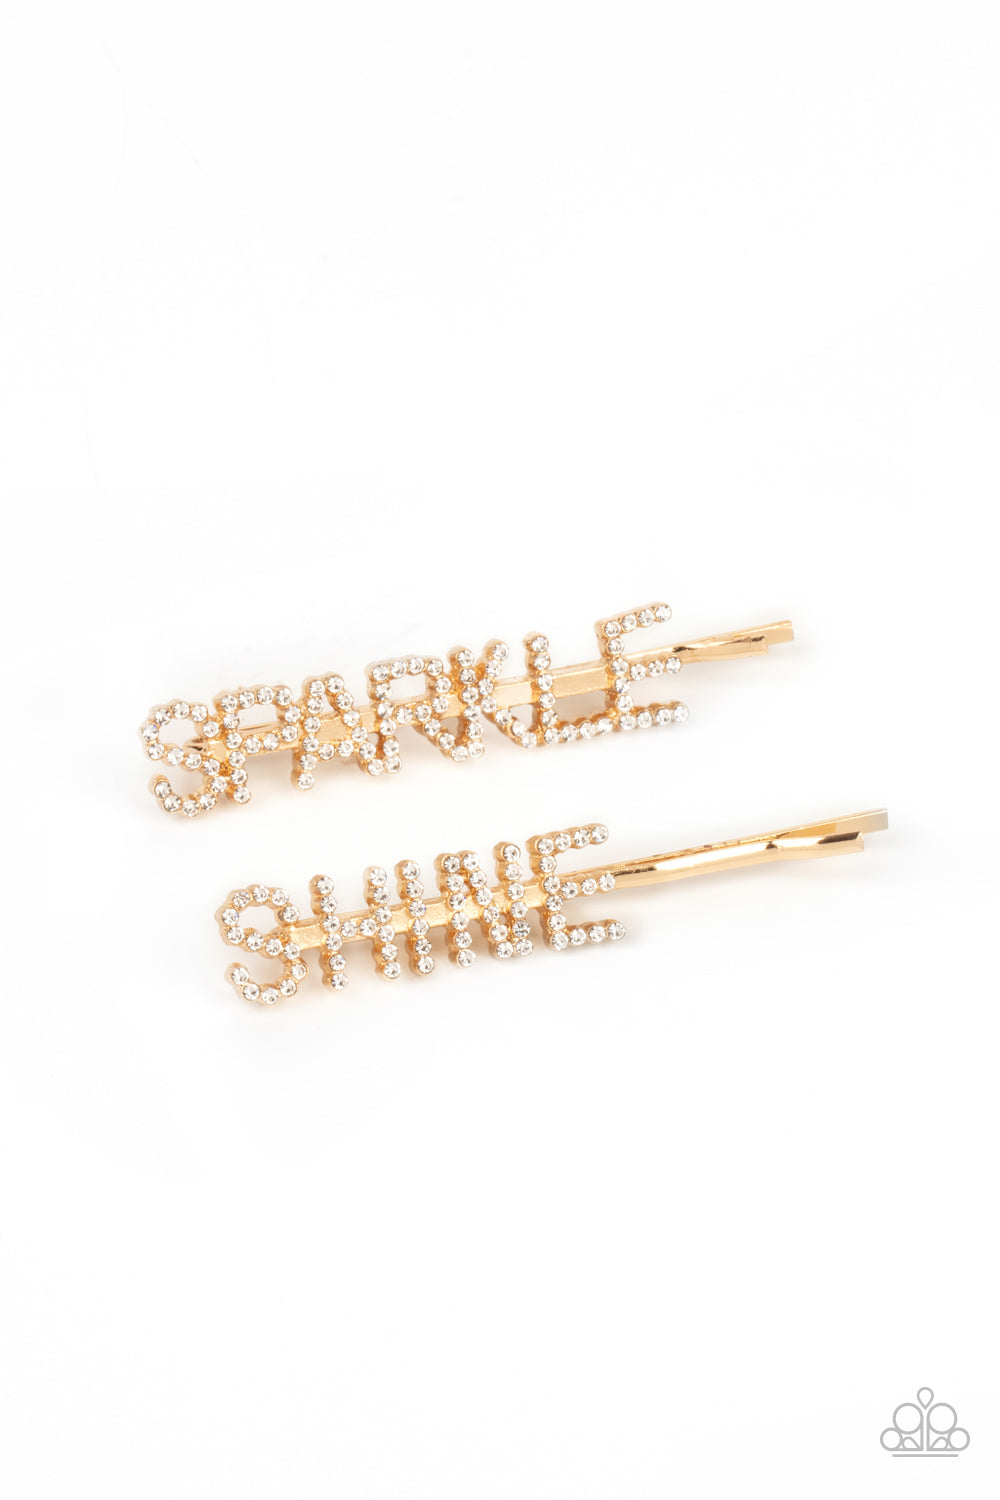 Paparazzi Hair Clip ~ Center of the SPARKLE-verse - Gold Hair Accessories